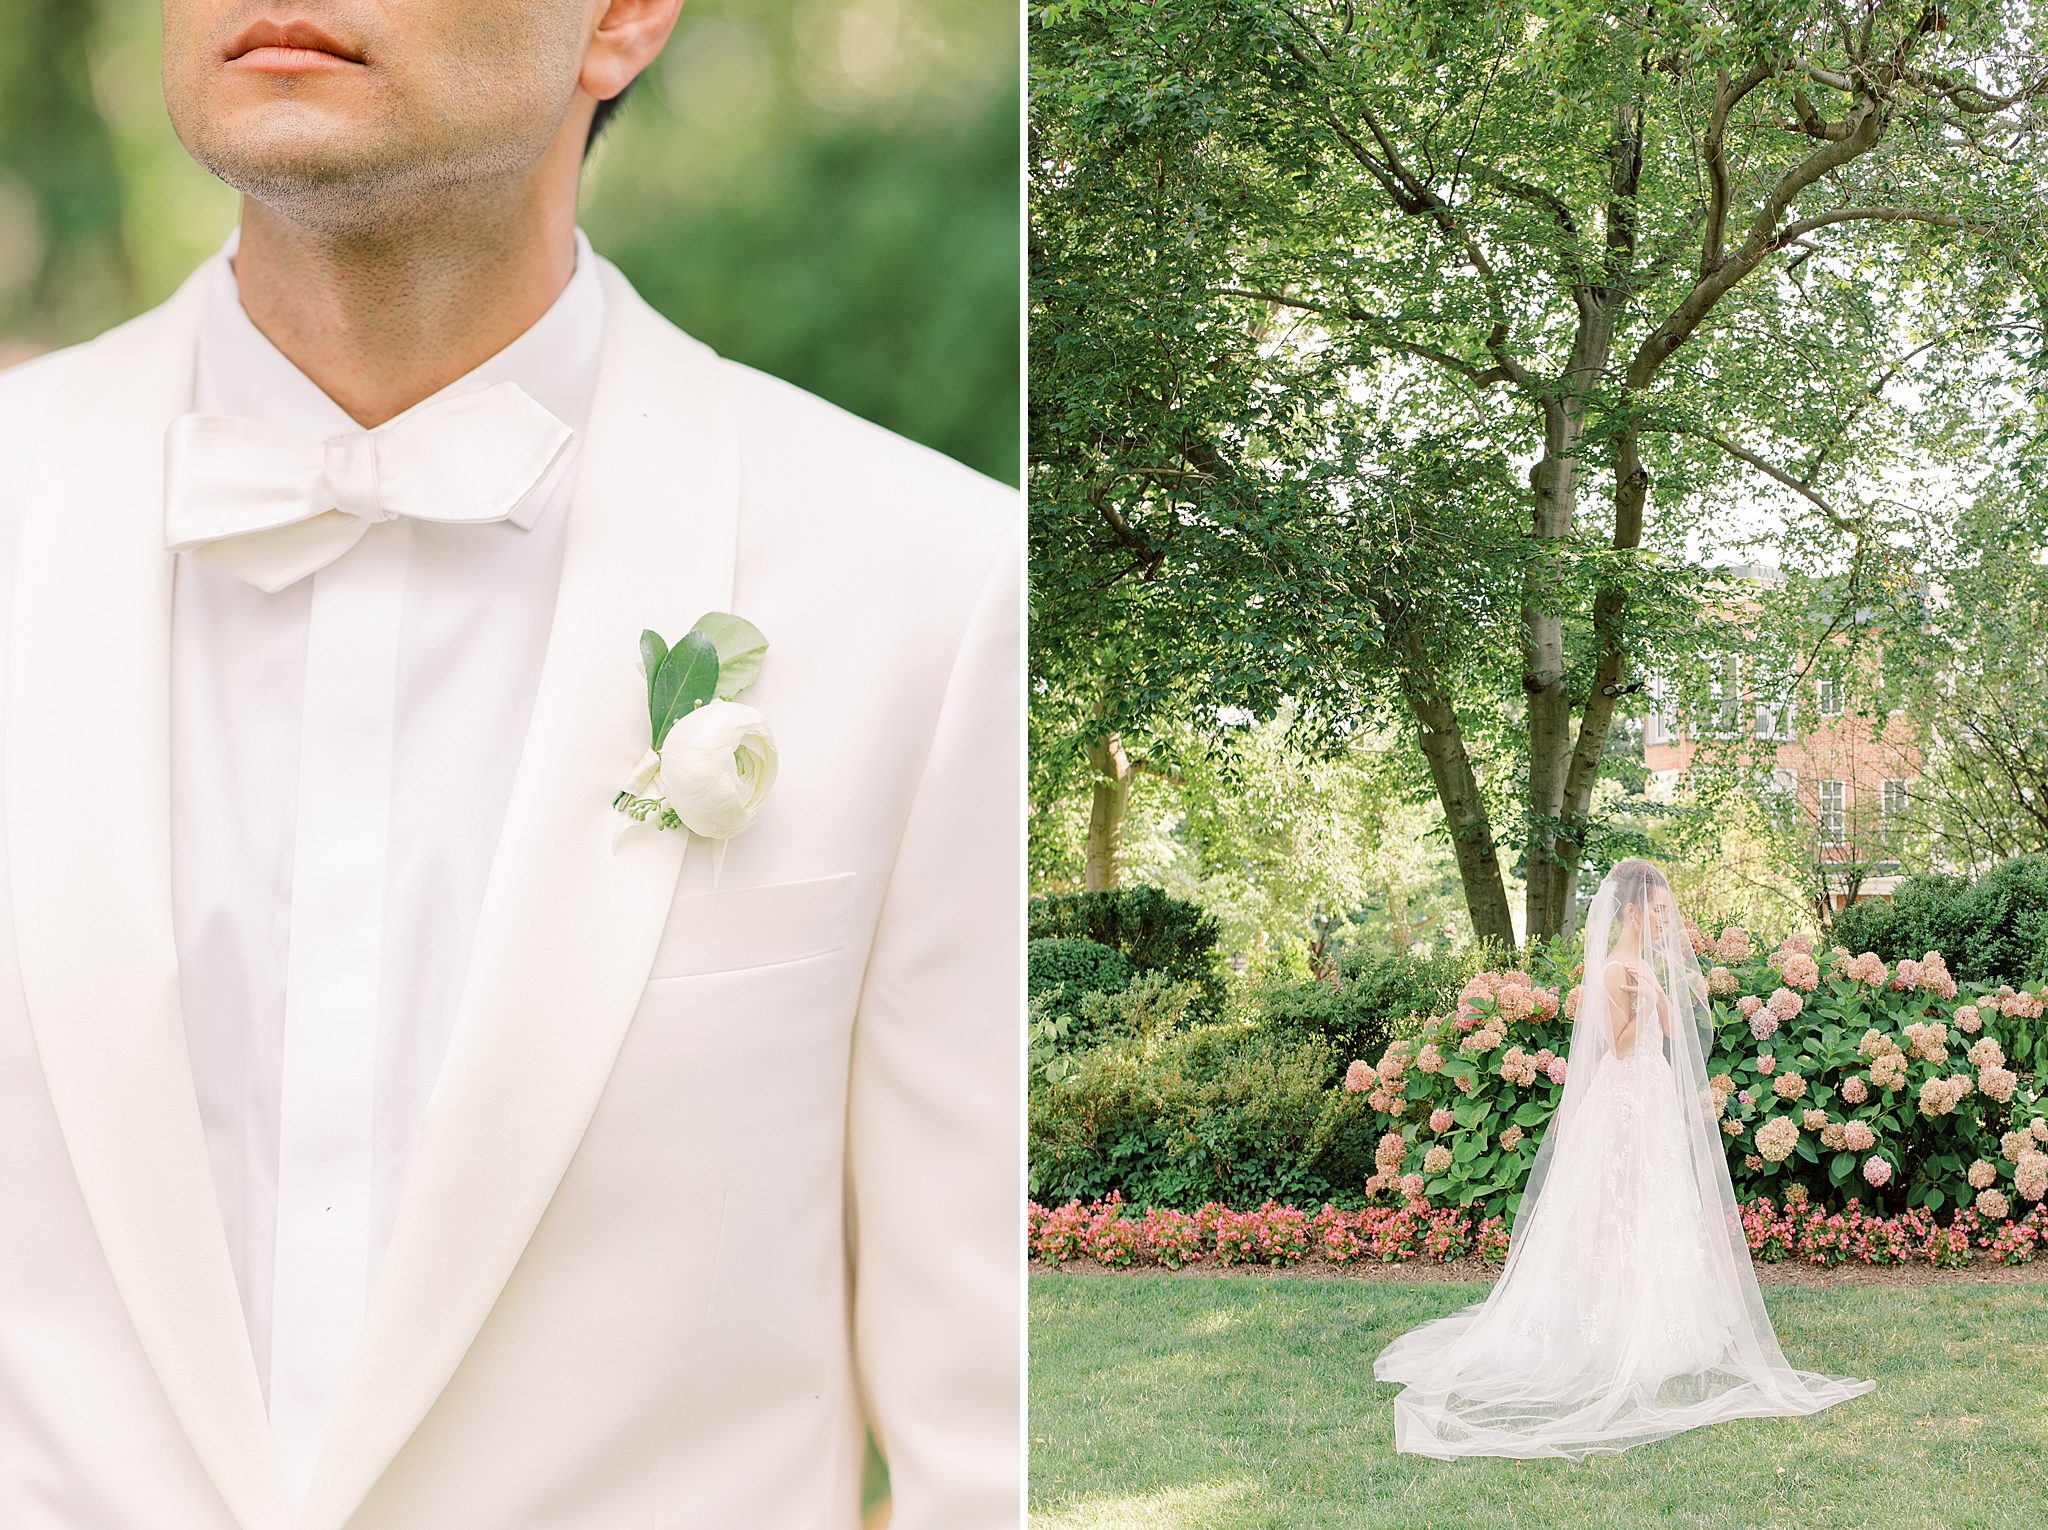 This elegant black tie Meridian House wedding in Washington, DC was photographed by Alicia Lacey Photography.